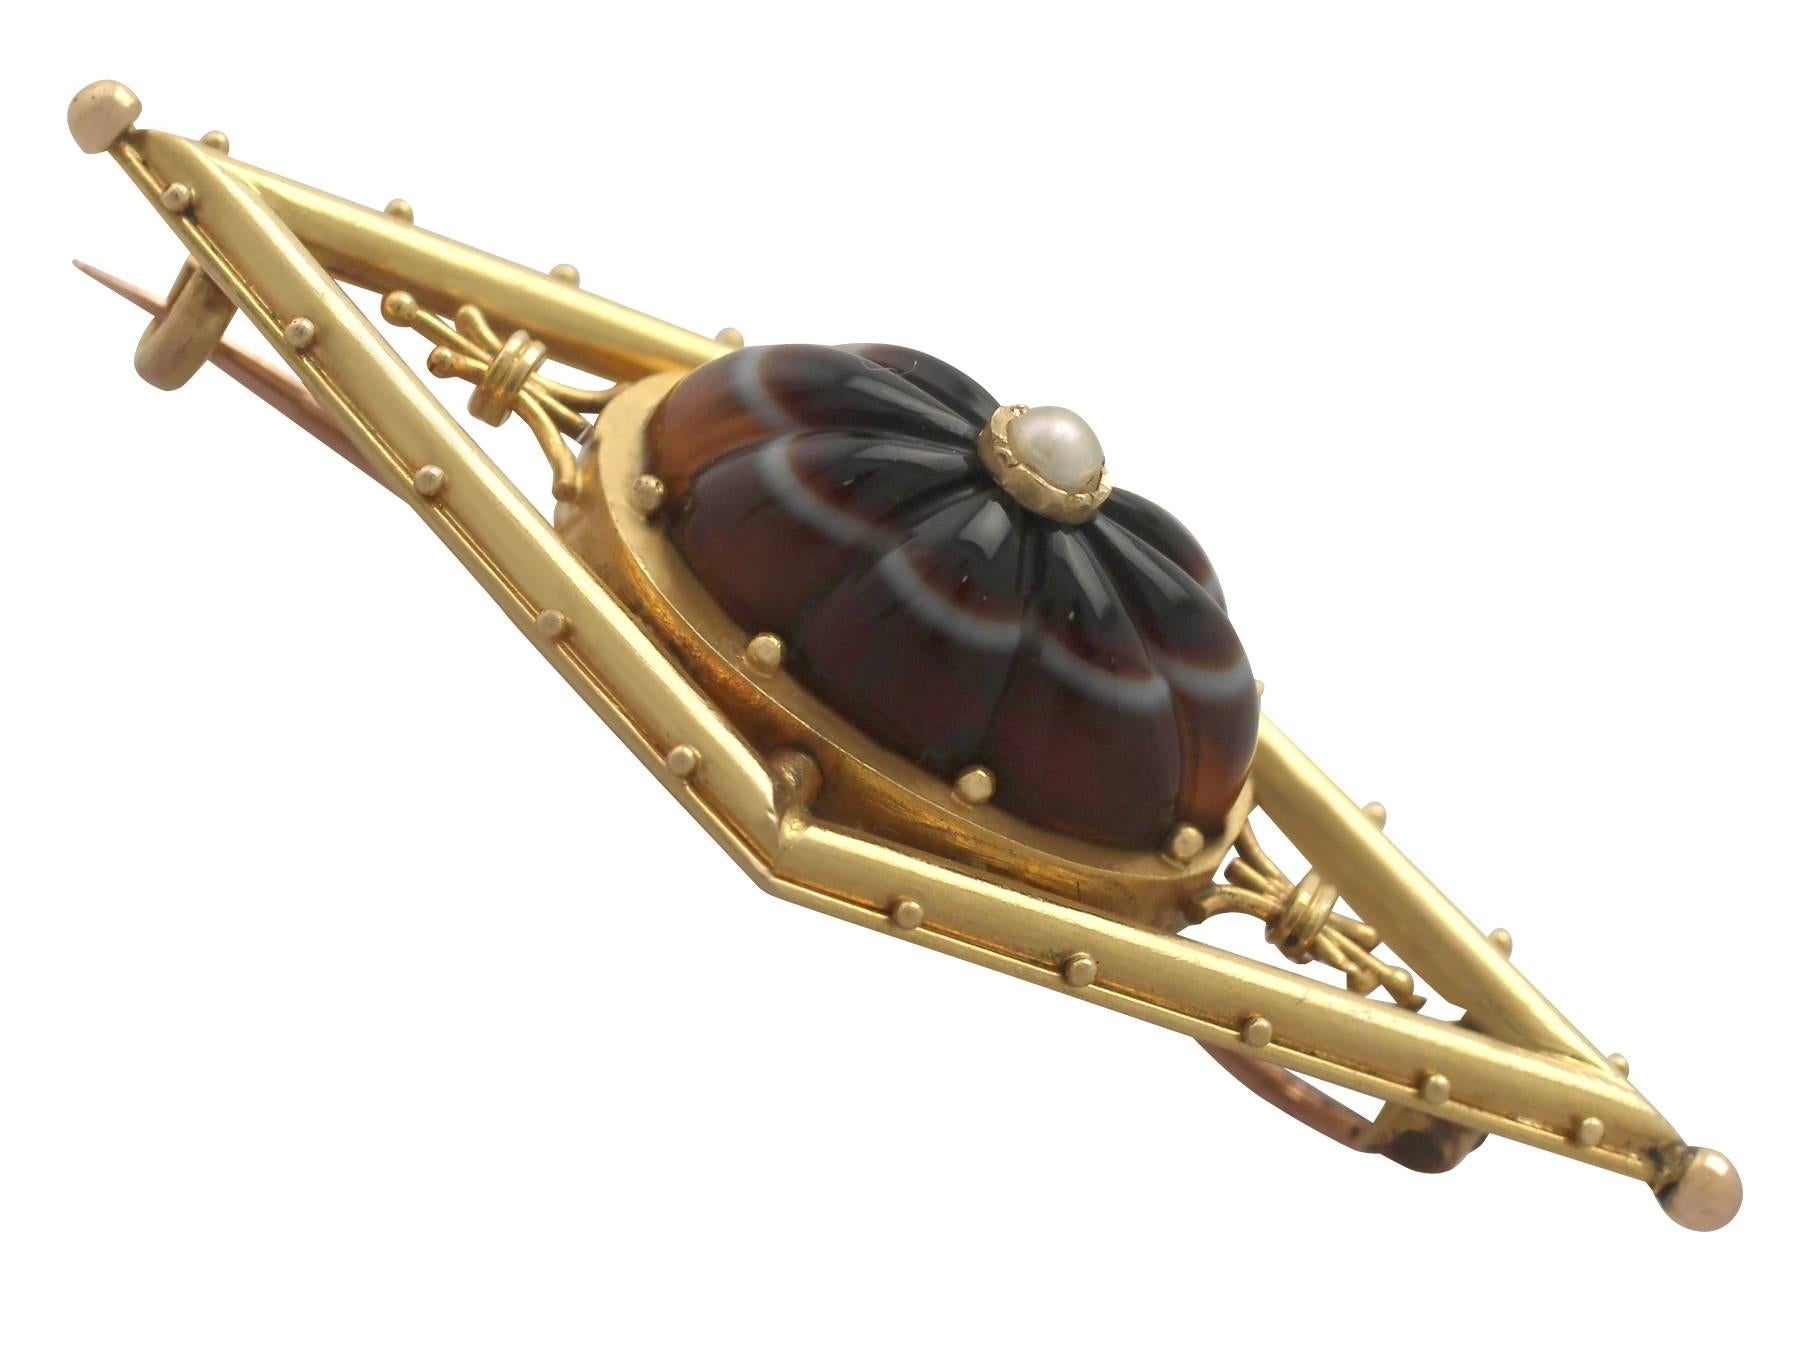 A fine and impressive agate and seed pearl, 15 karat yellow gold and 9 karat rose gold brooch; part of our diverse antique jewelry and estate jewelry collections

This fine and impressive Victorian agate brooch has been crafted in 15 k yellow gold